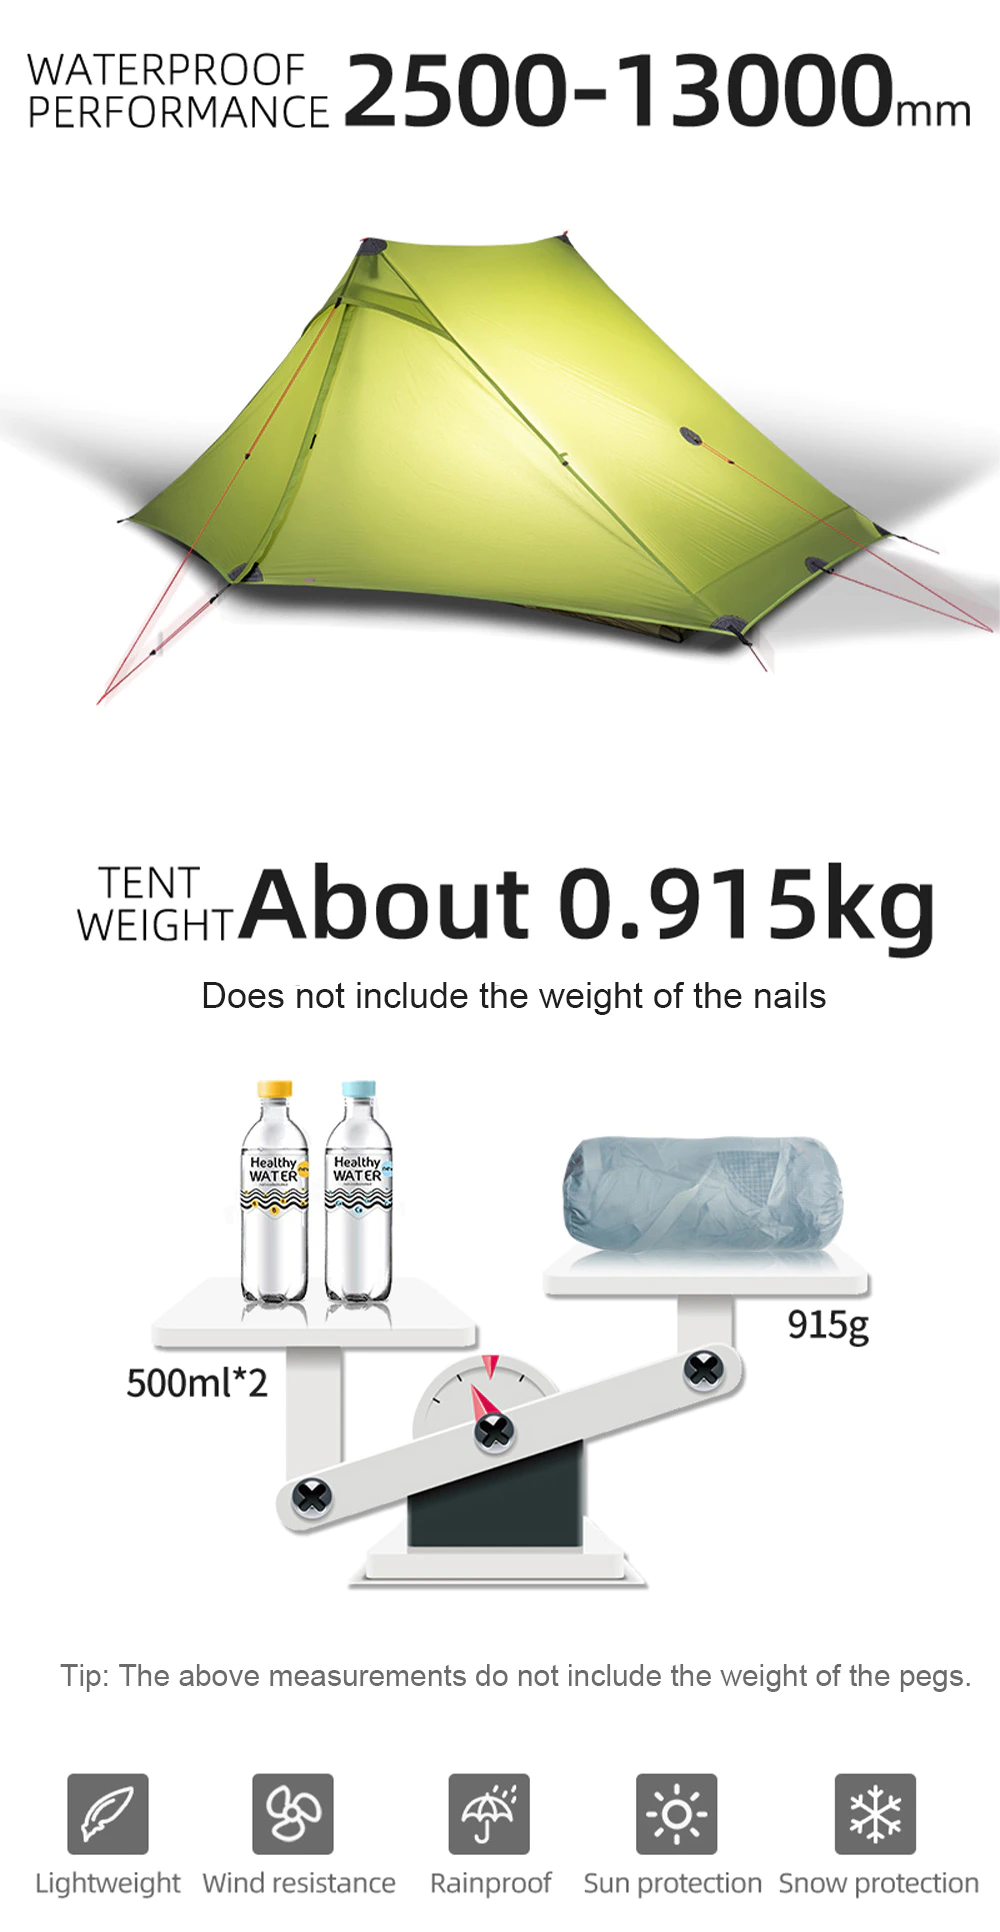 Cheap Goat Tents 3F UL GEAR Camping Tent Ultralight 2 Person 4 Season Professional 20D Silicone Nylon Outdoor Tent For Hiking LanShan 2 Pro   